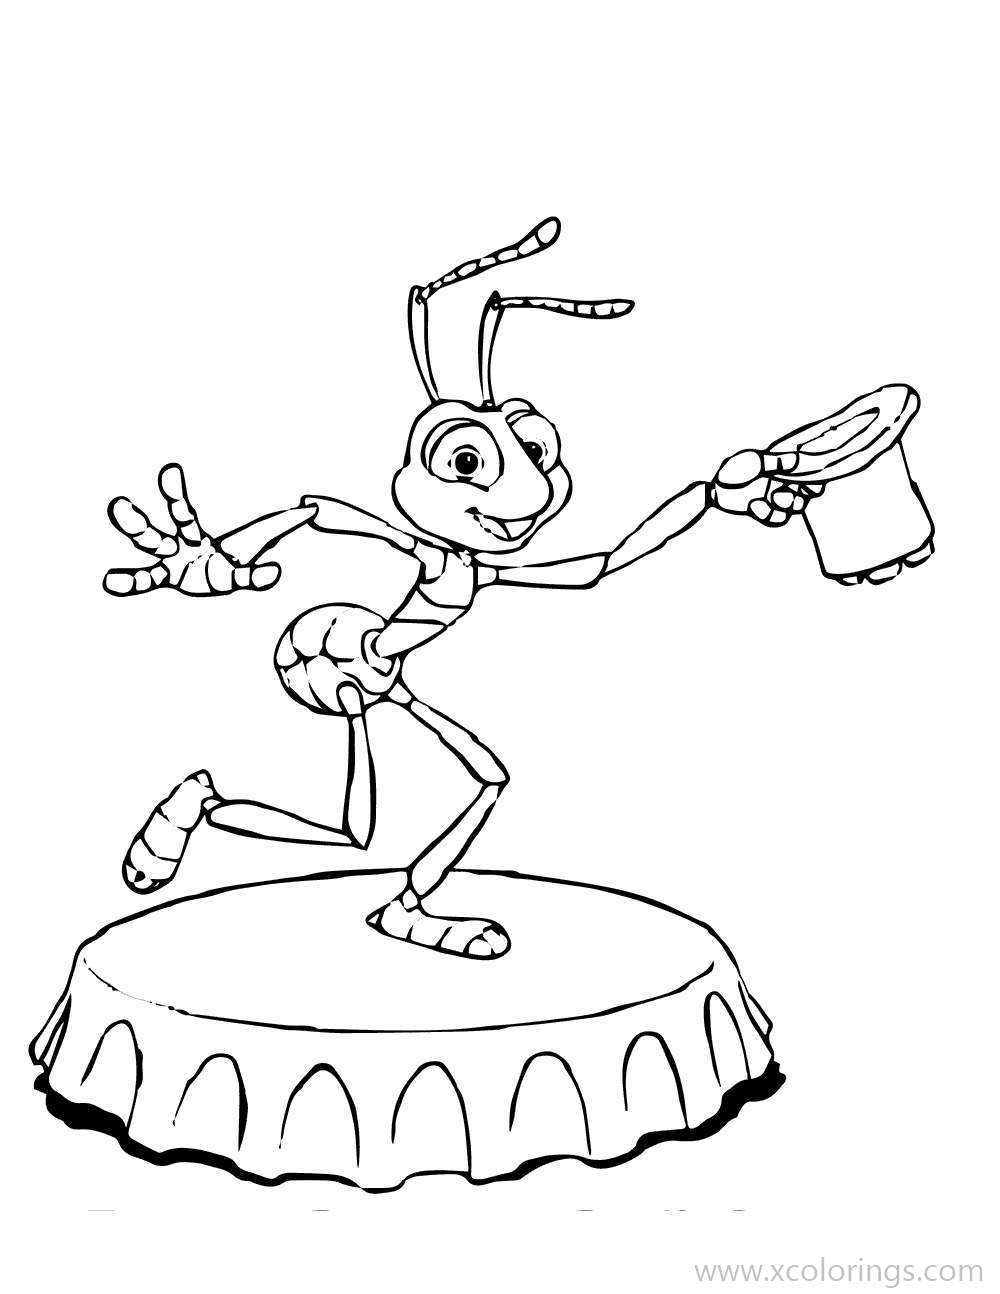 Free A Bugs Life Coloring Pages Flik Dancing With A Hat printable